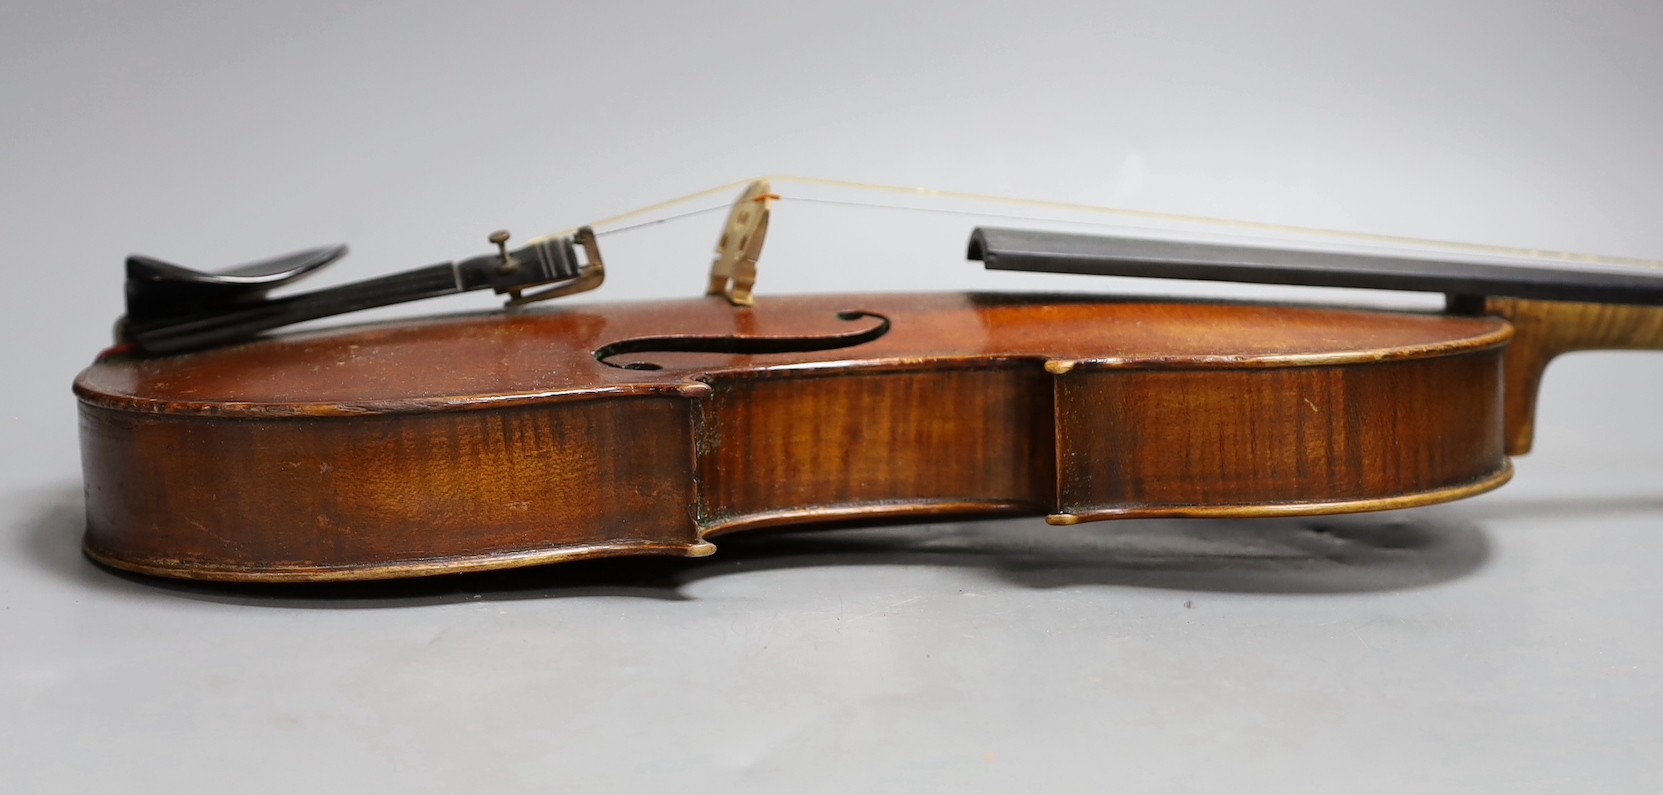 A cased late 19th century English violin, inscribed W. Heaton maker 1887 (?), back measures 35.5cm excl button